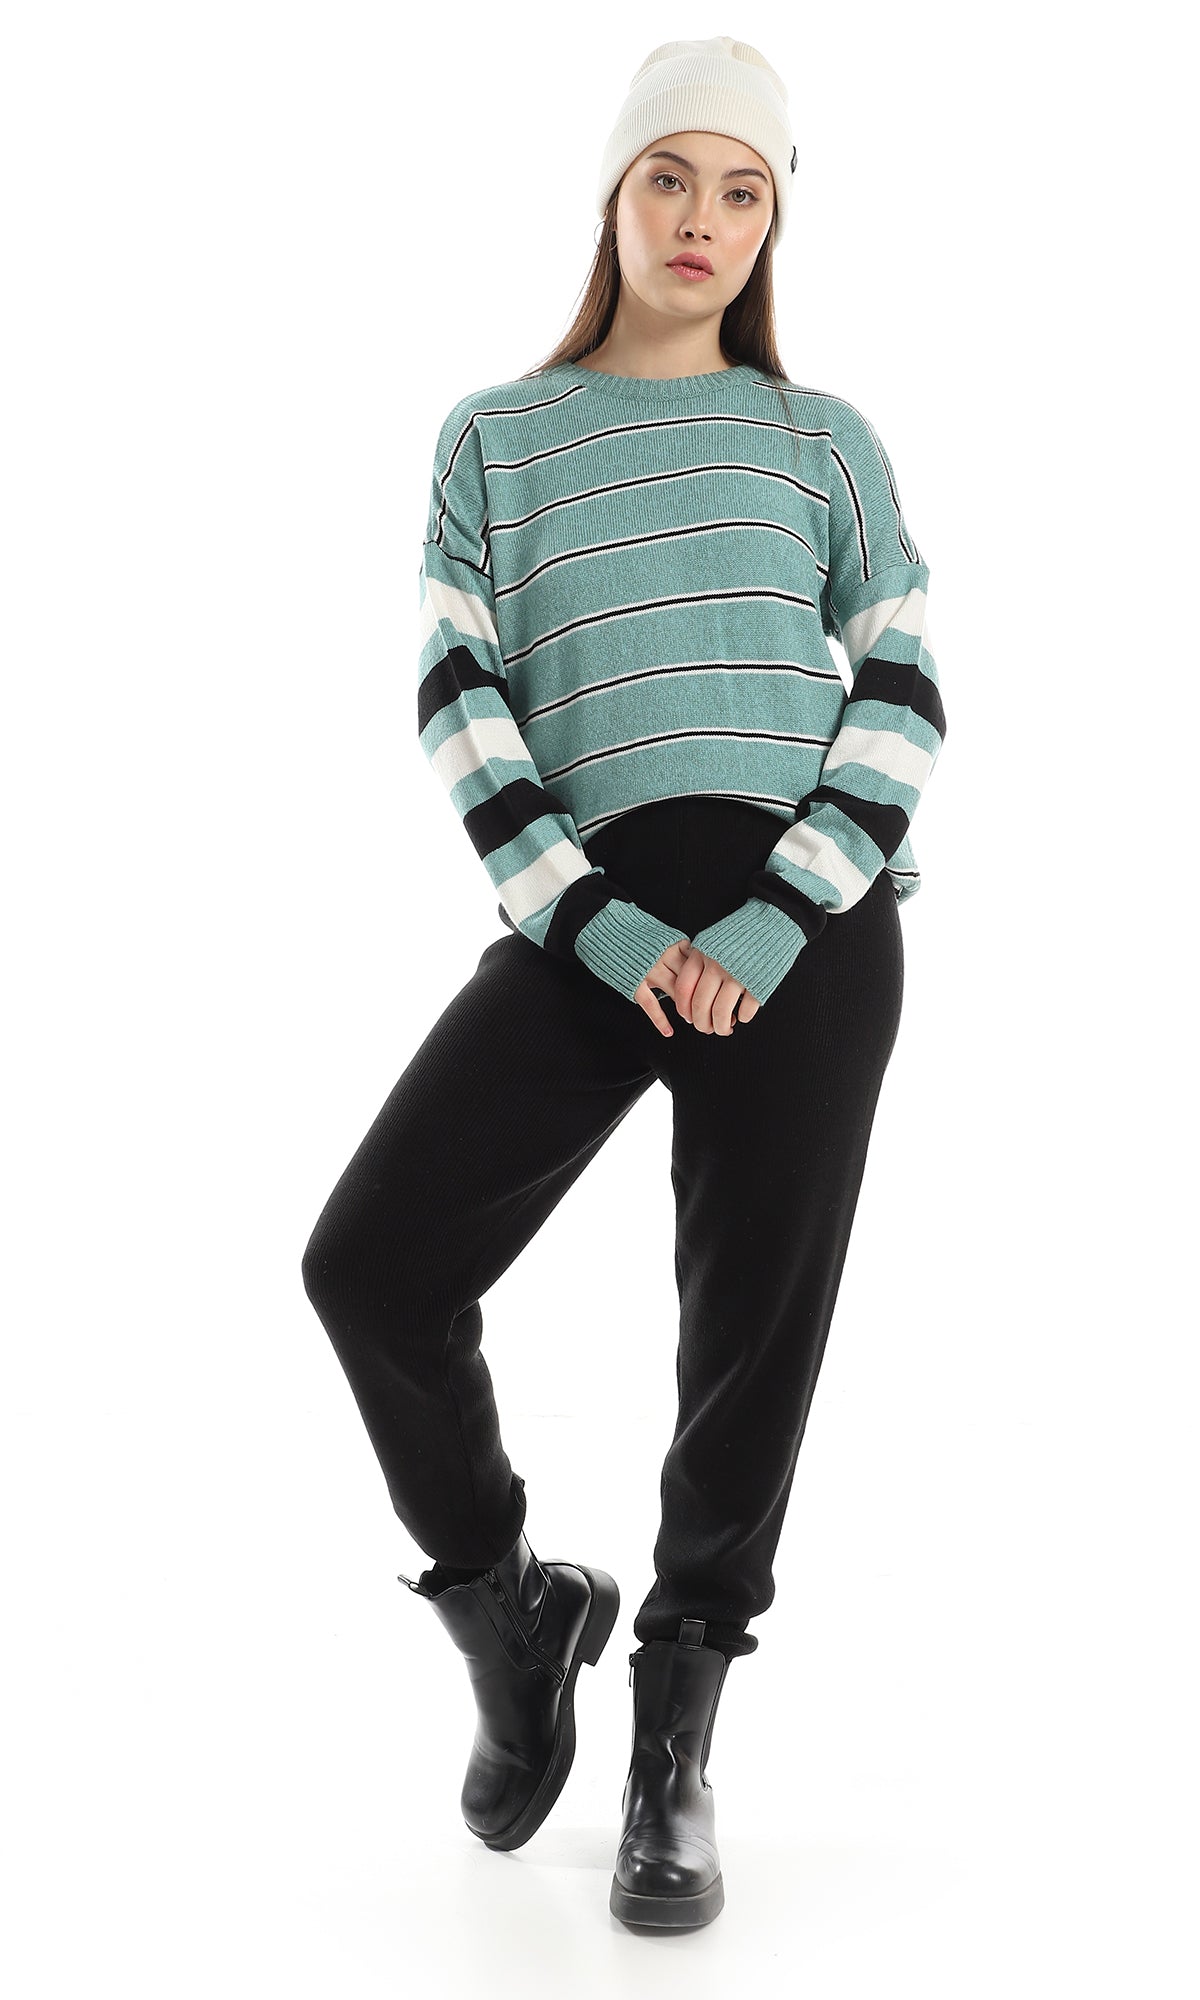 O160300 Wide Thin Striped Pattern Long Acrylic Pullover - Green, Black & Off White